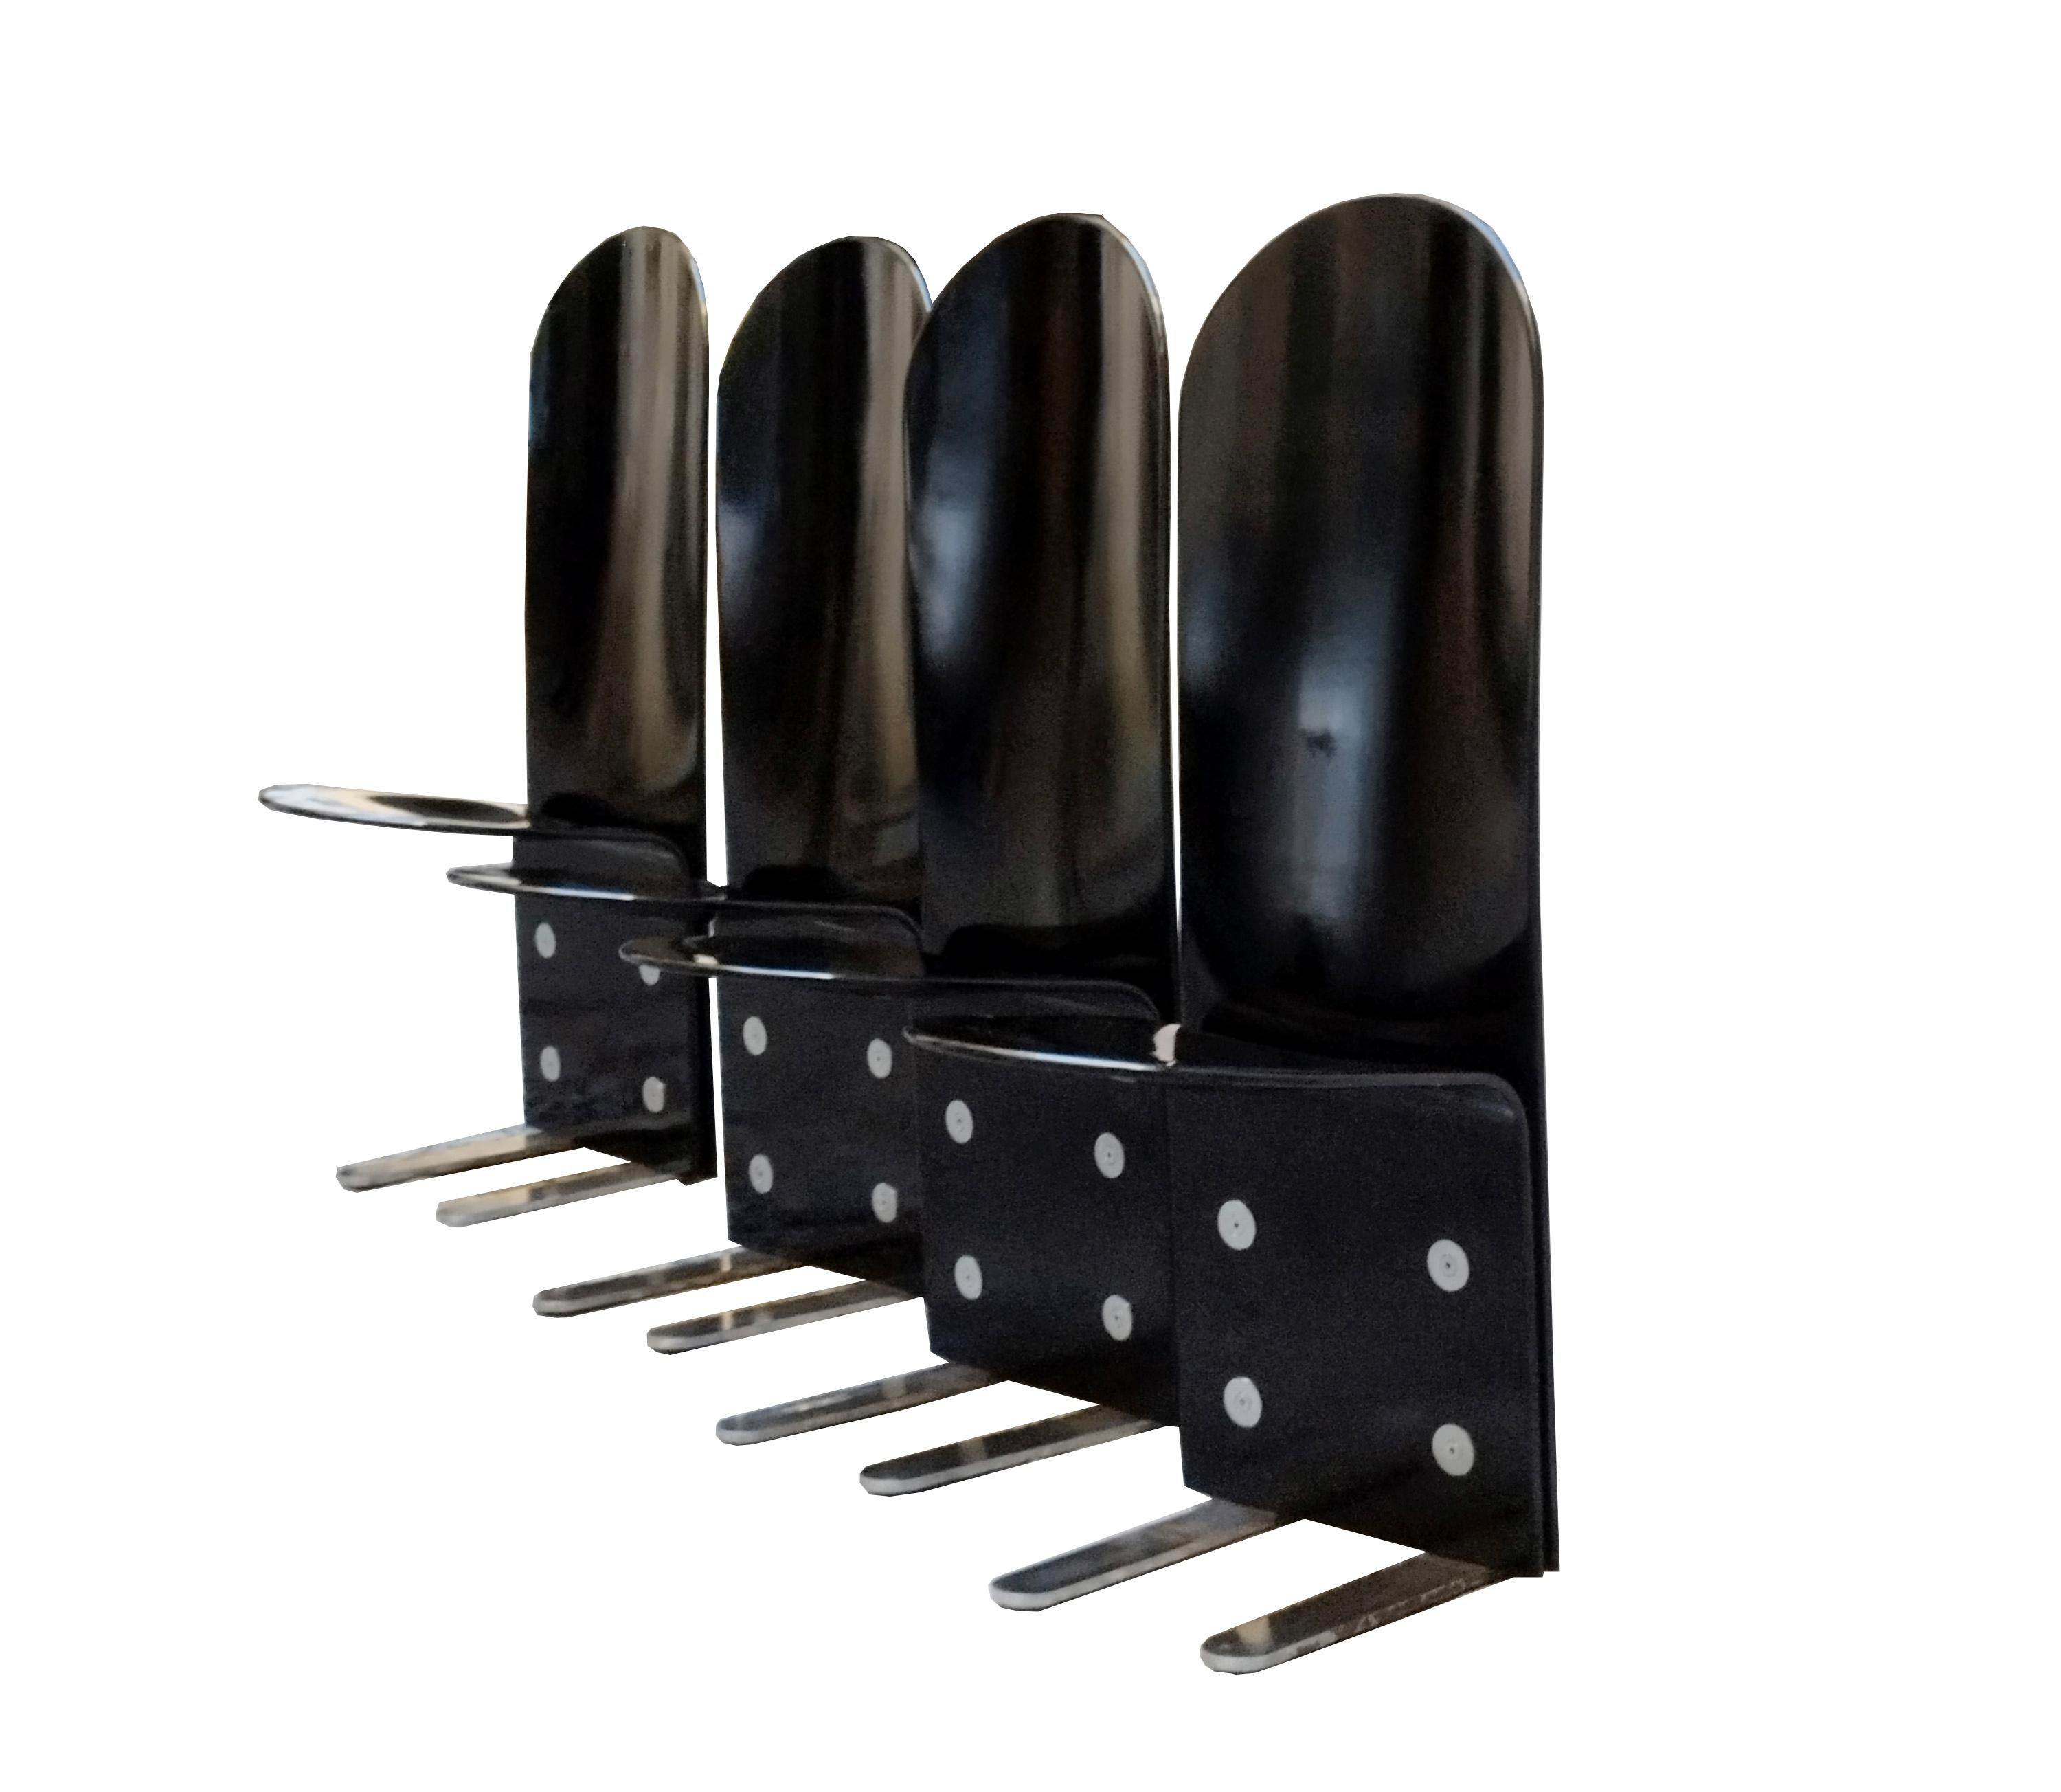 Set of four Pellicano model chairs in curved black lacquered wood Chromed steel feet with screws and washers to fix the wood, designer Luigi Saccardo for Armet Mid 1970s.